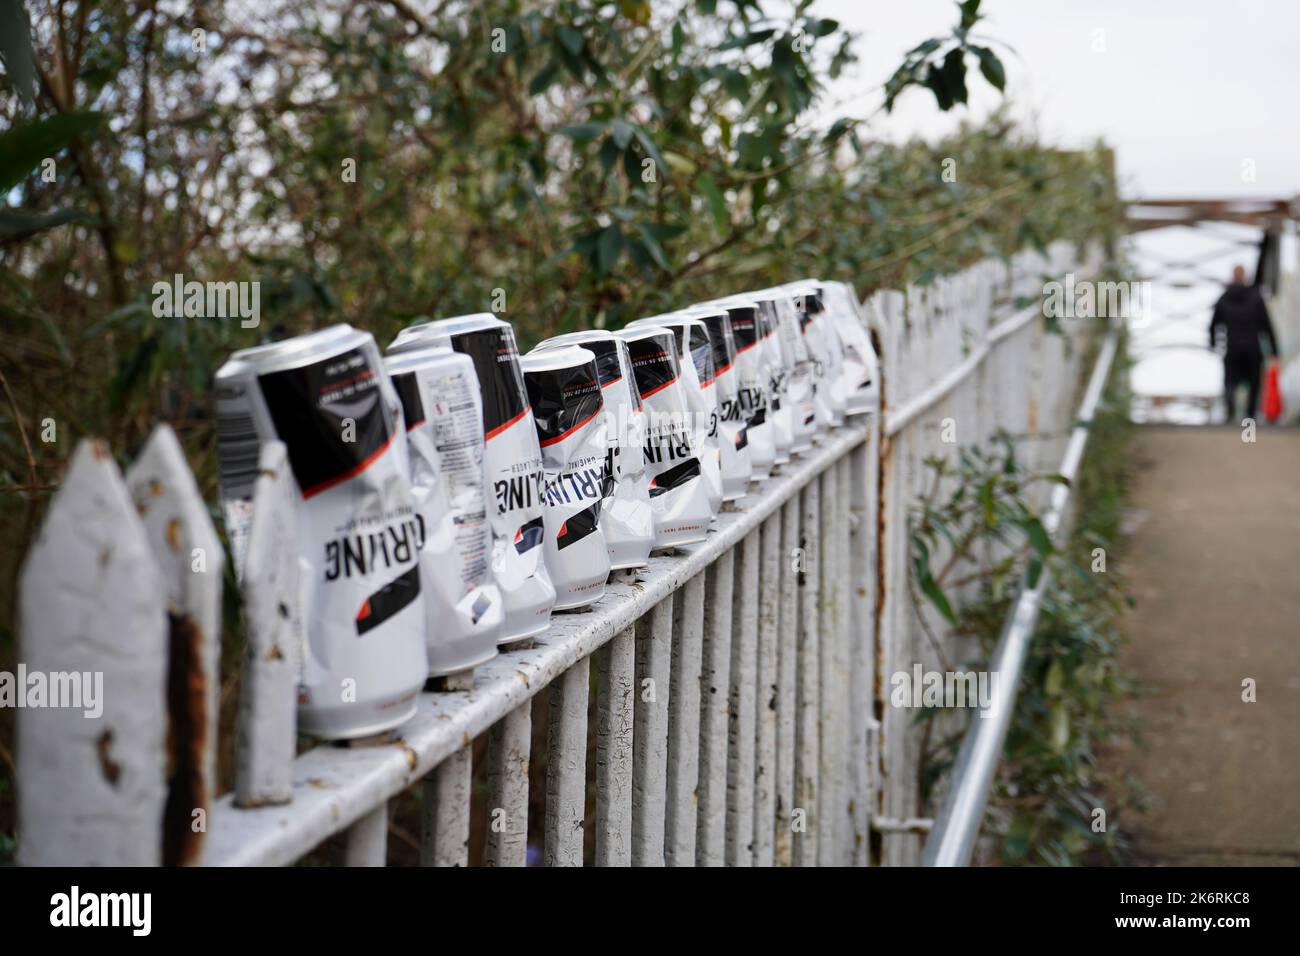 Row of upturned empty Carling beer cans on railings on a bridge. Stock Photo